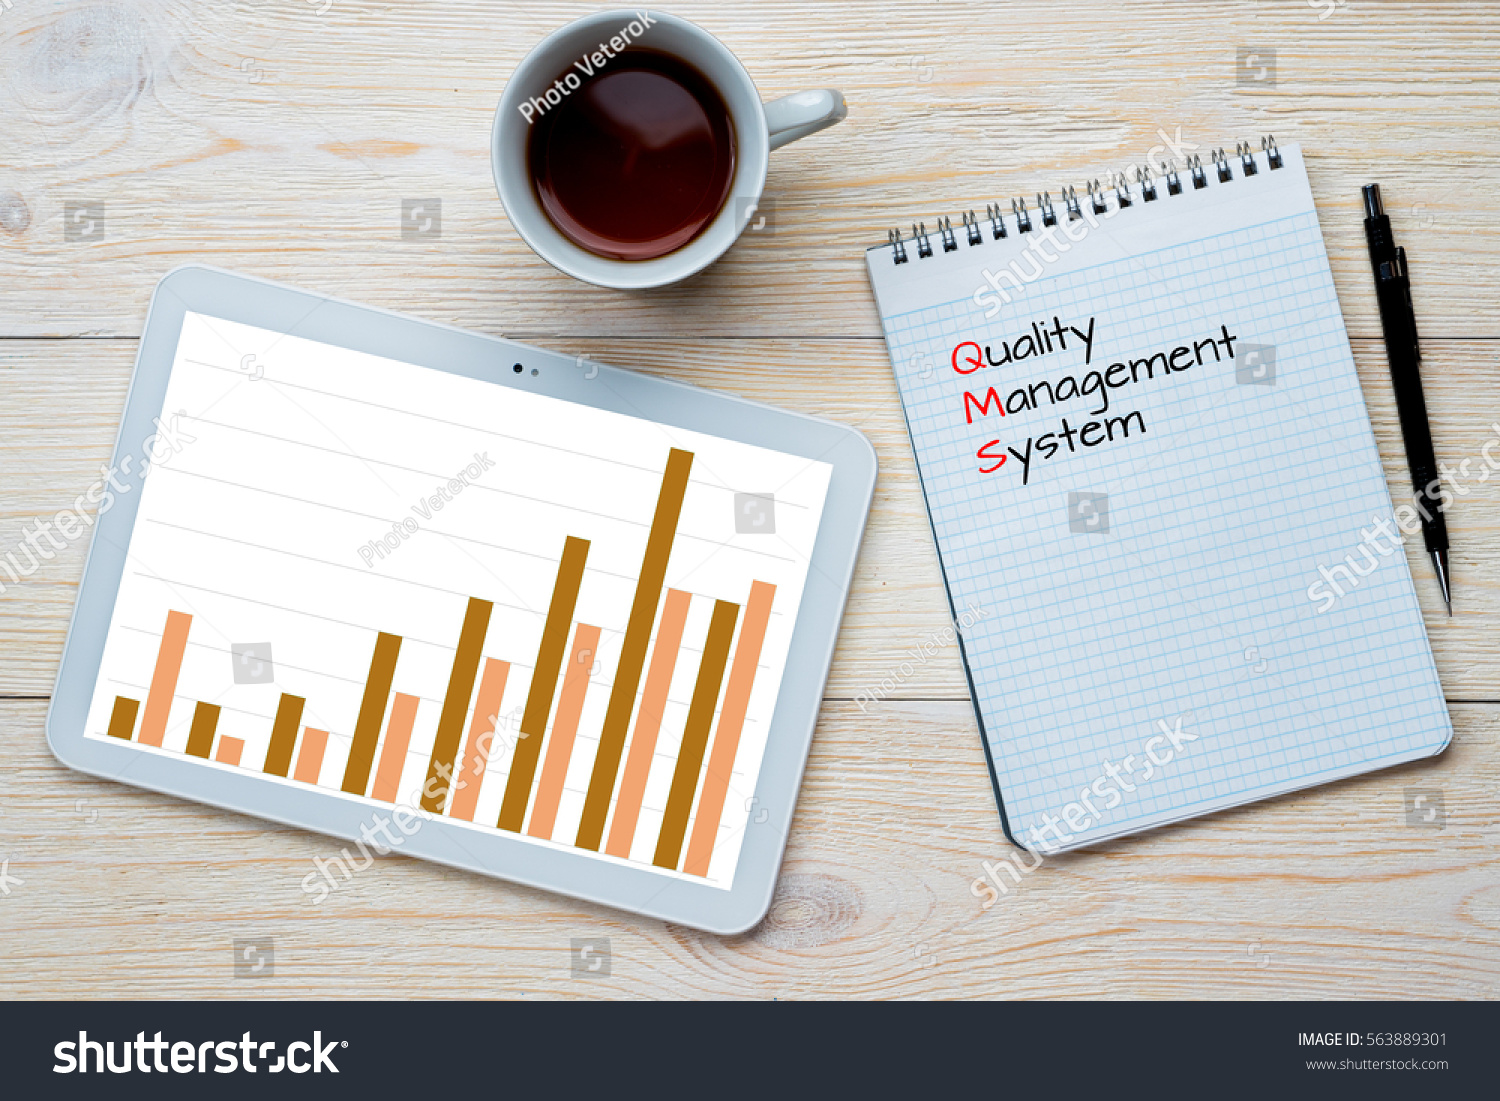 quality management system bar chart with cup #563889301